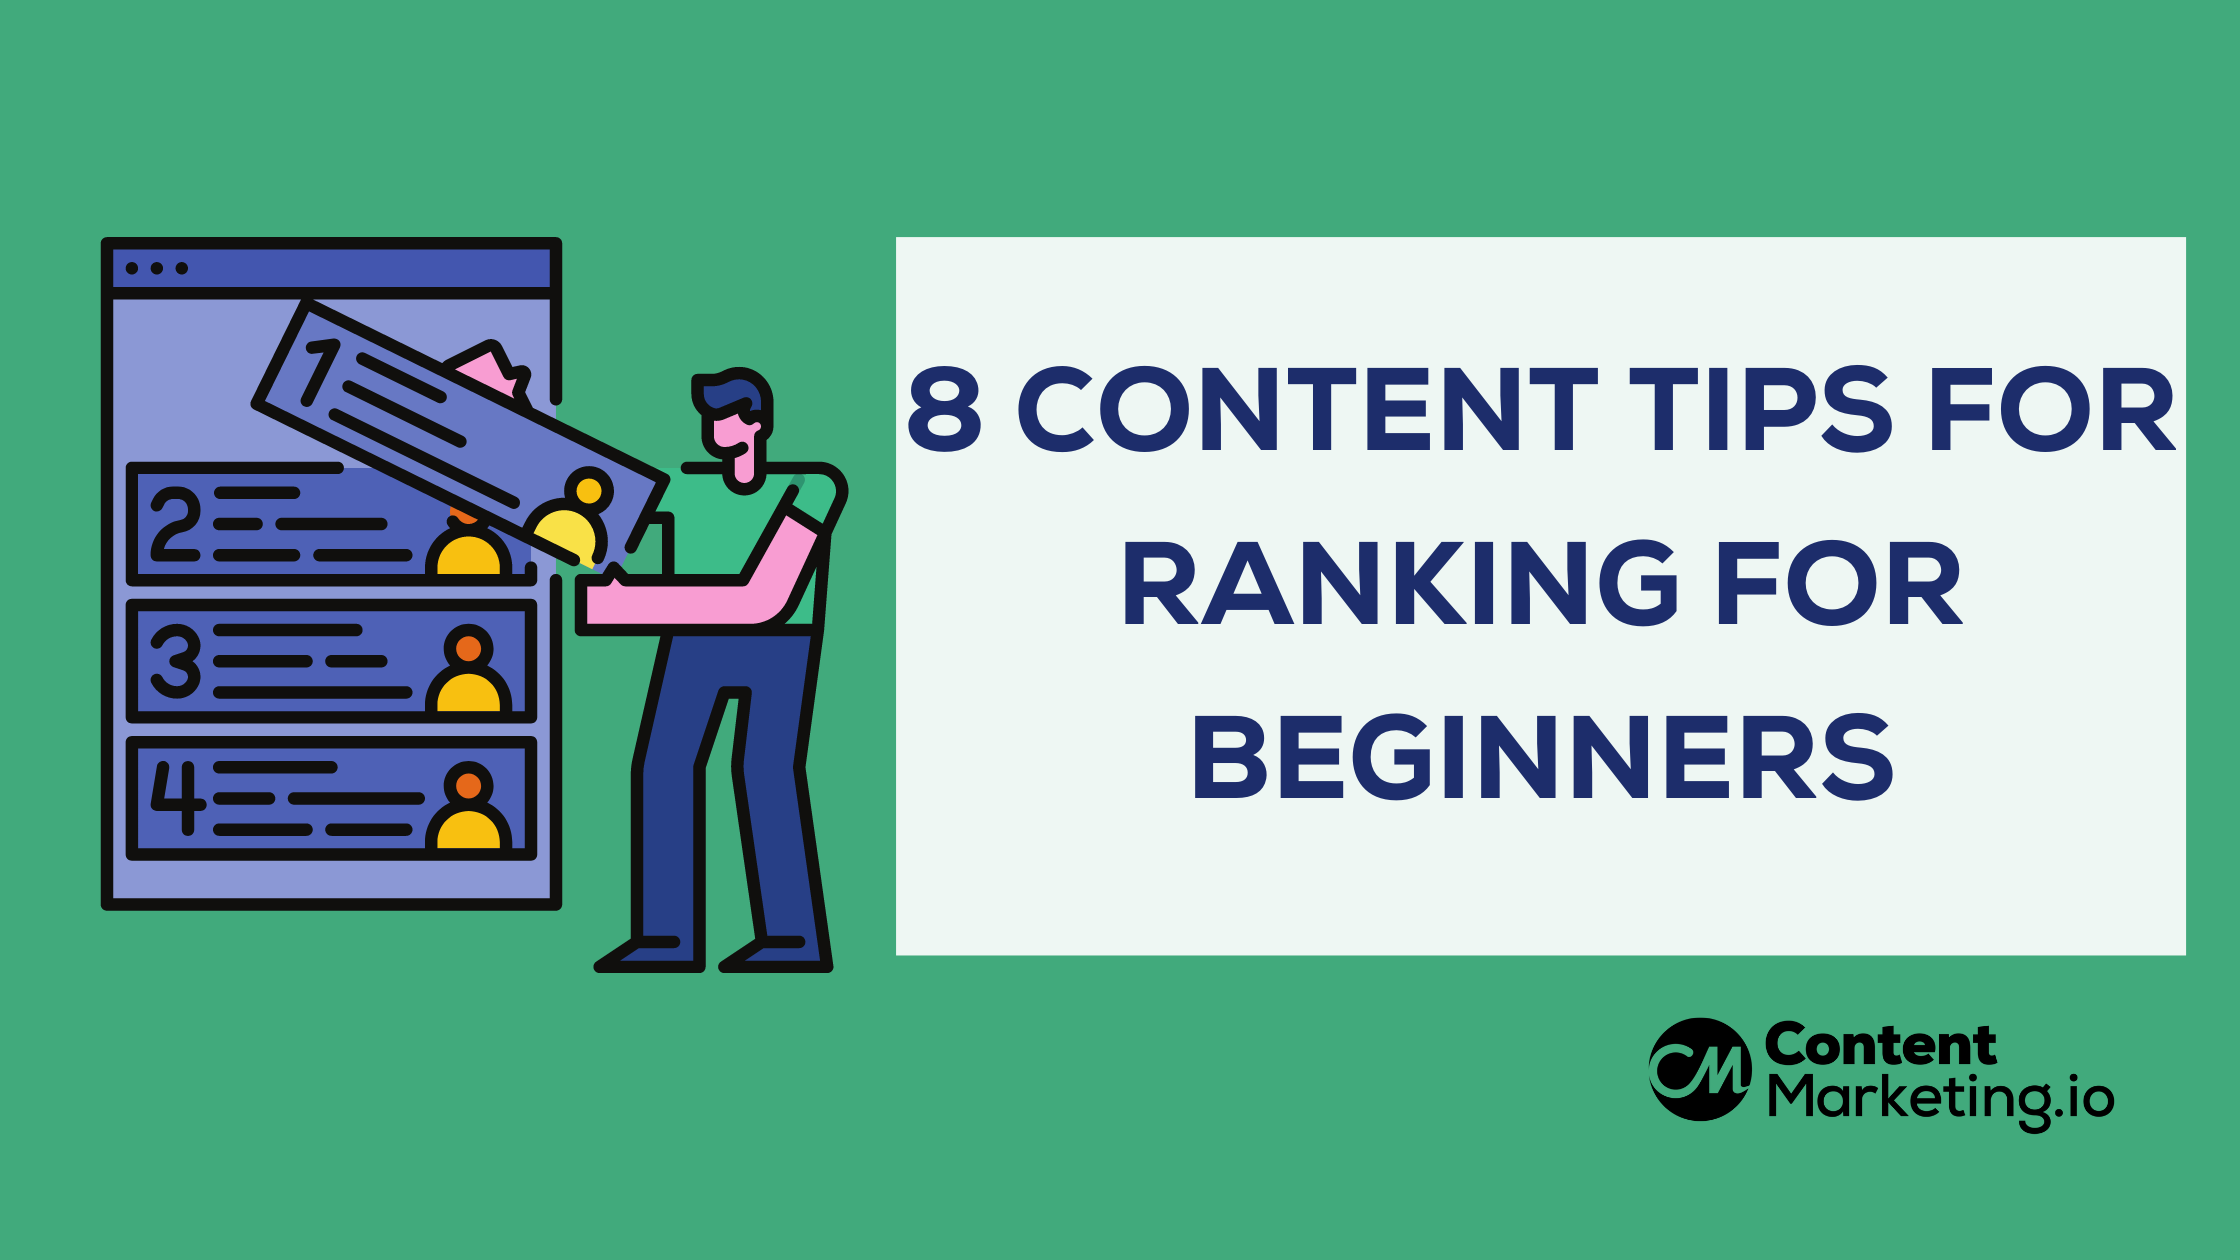 Content Tips for Ranking